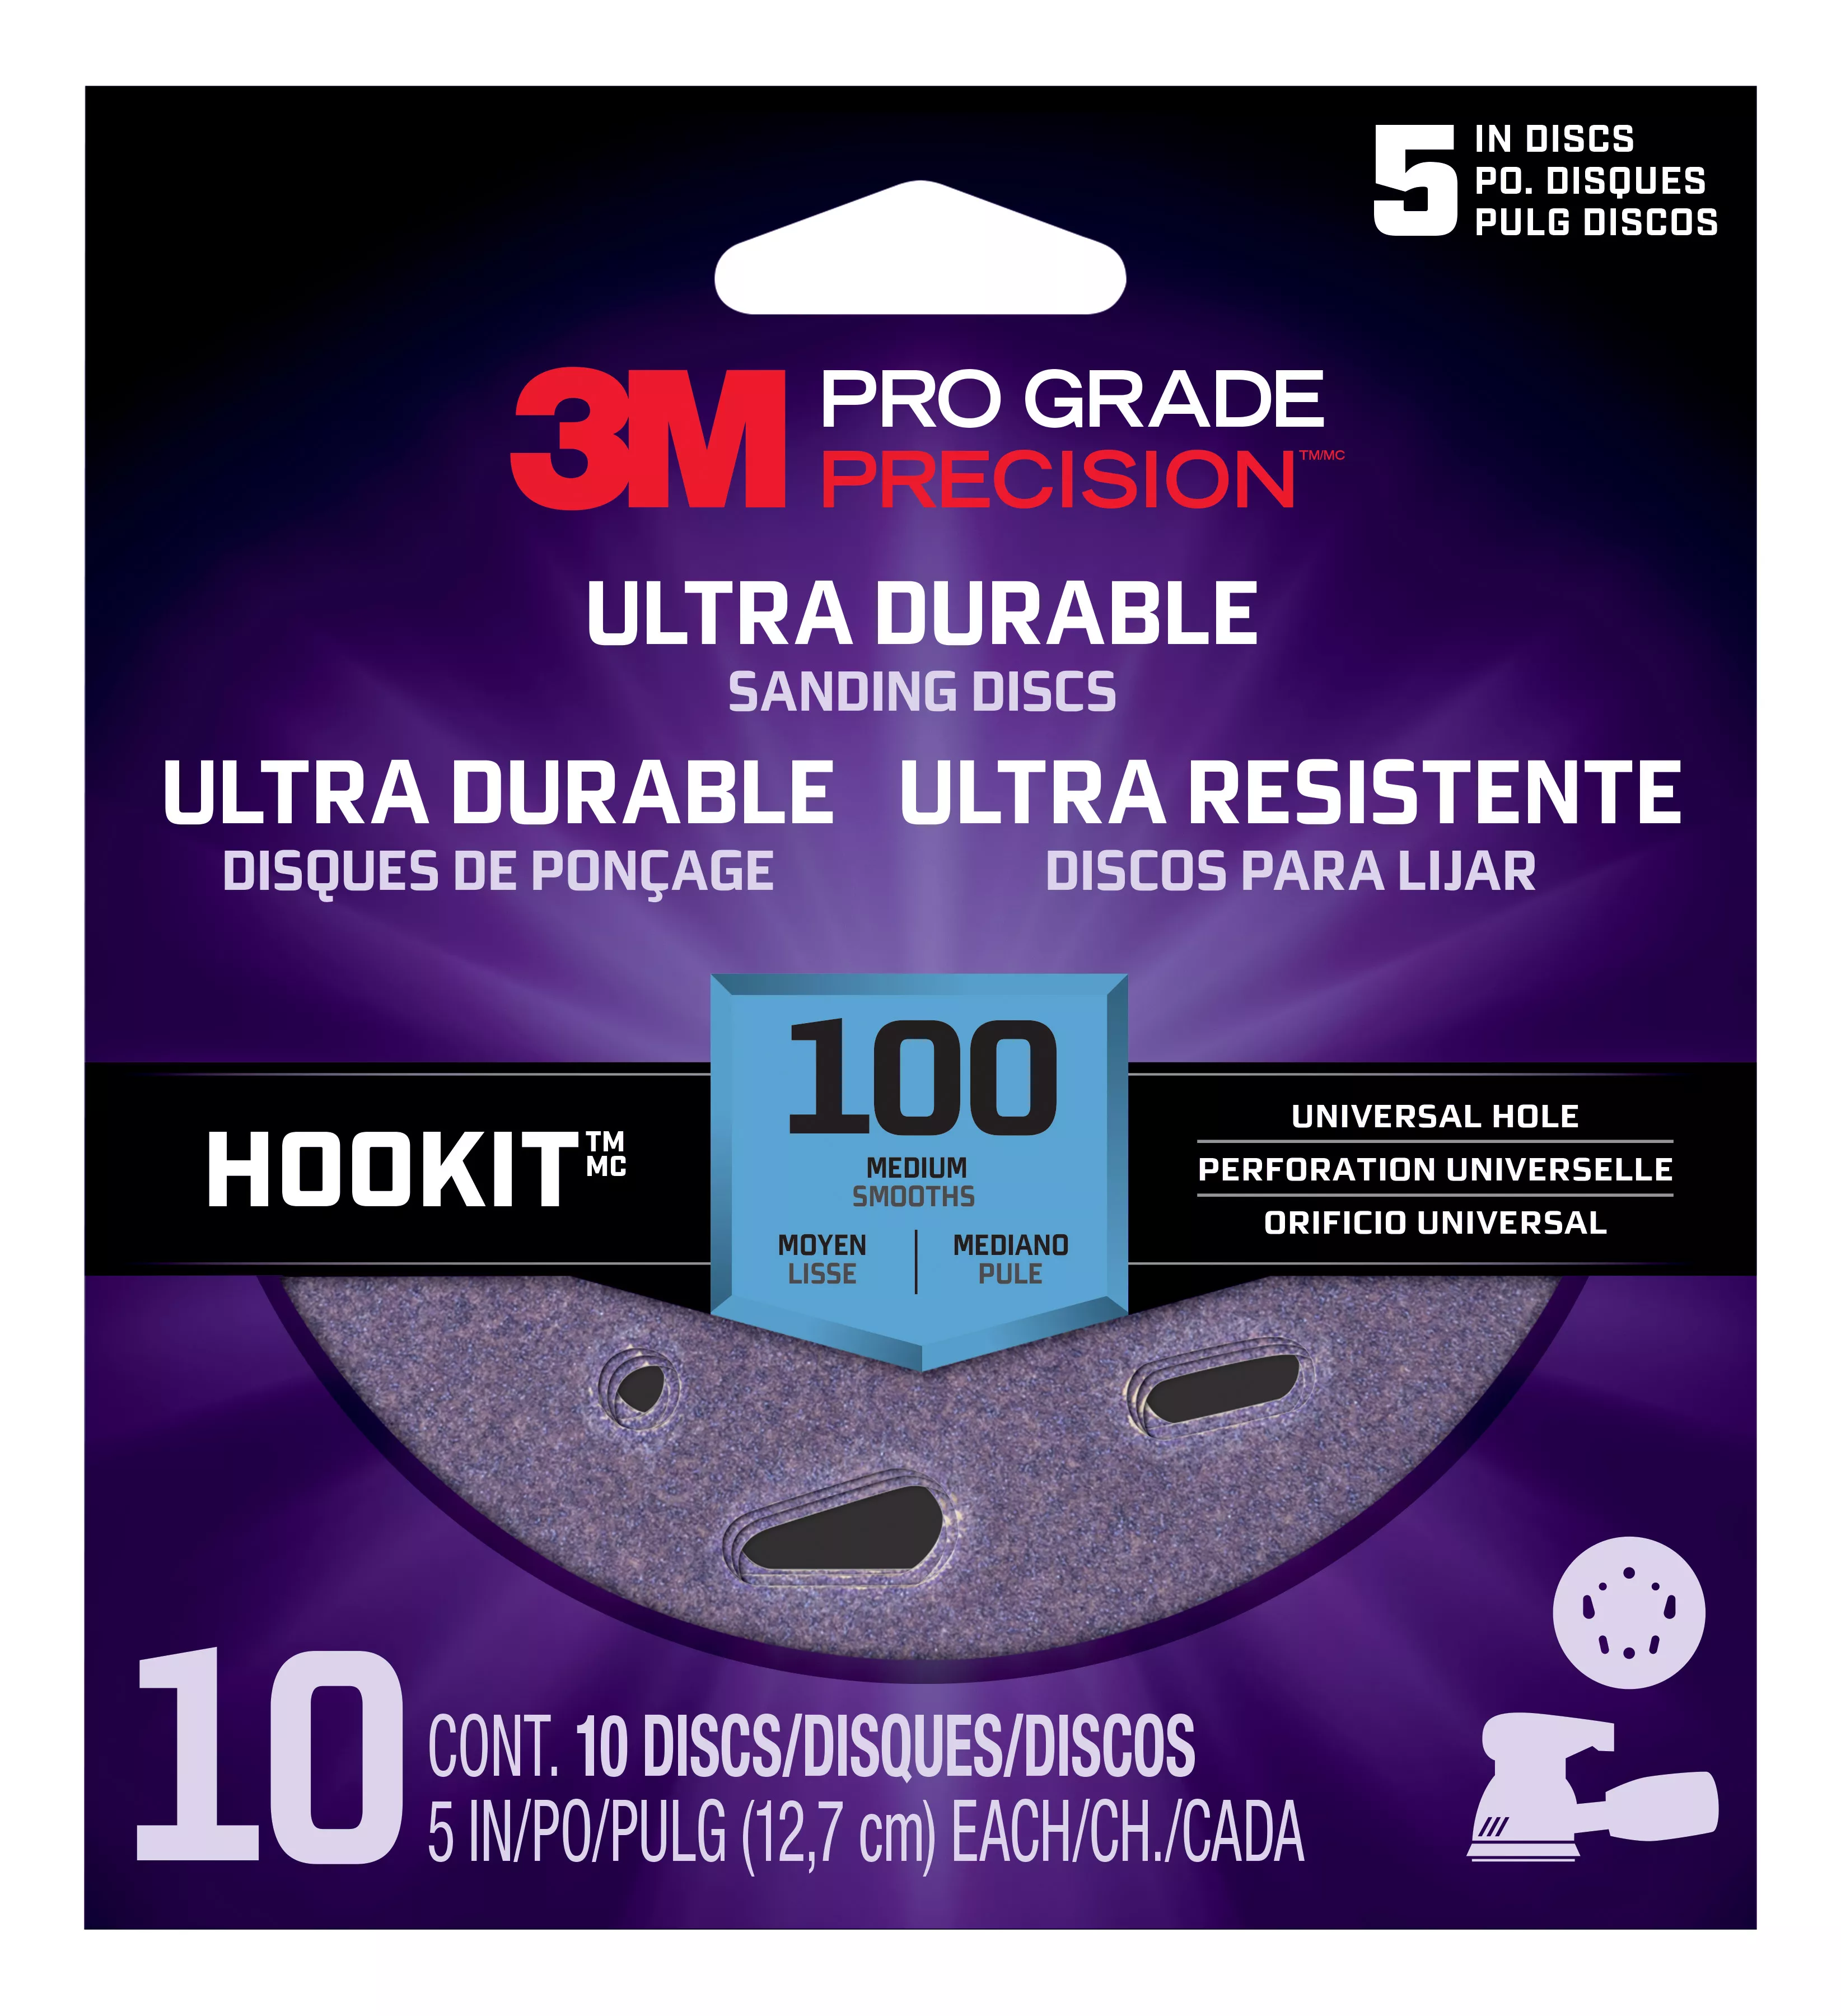 3M™ Pro Grade Precision™ Ultra Durable Universal Hole Sanding Disc,
DUH5100TRI-10I, 5 inch UH, 100, 10/pack